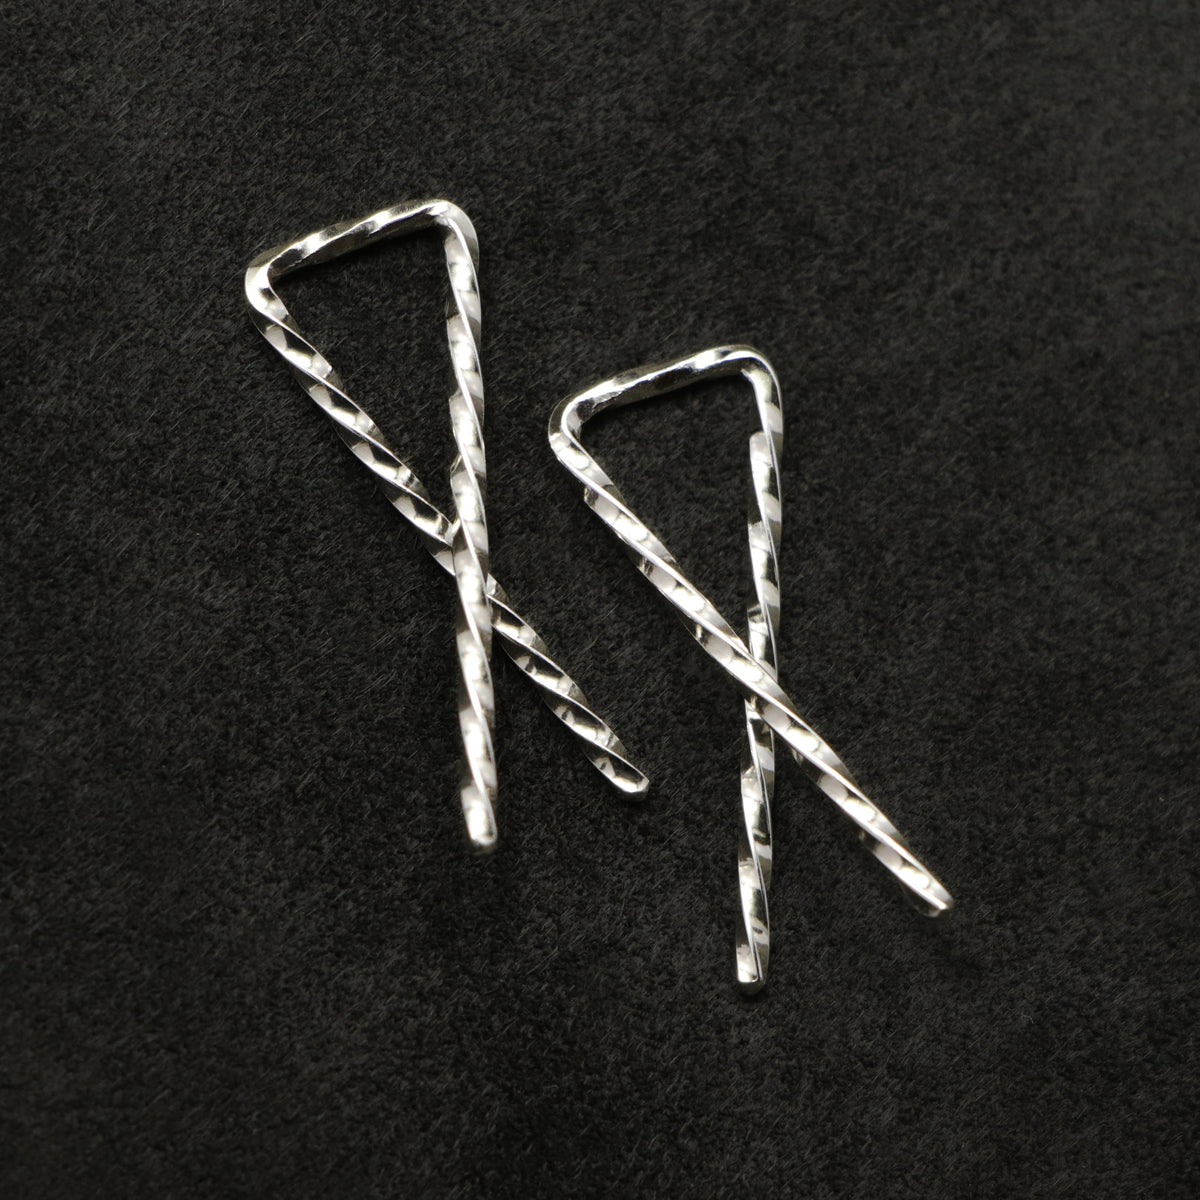 Detail view of Sibling Ribbons in Sterling Silver earring representing we are all brothers and sisters by Caps Brothers